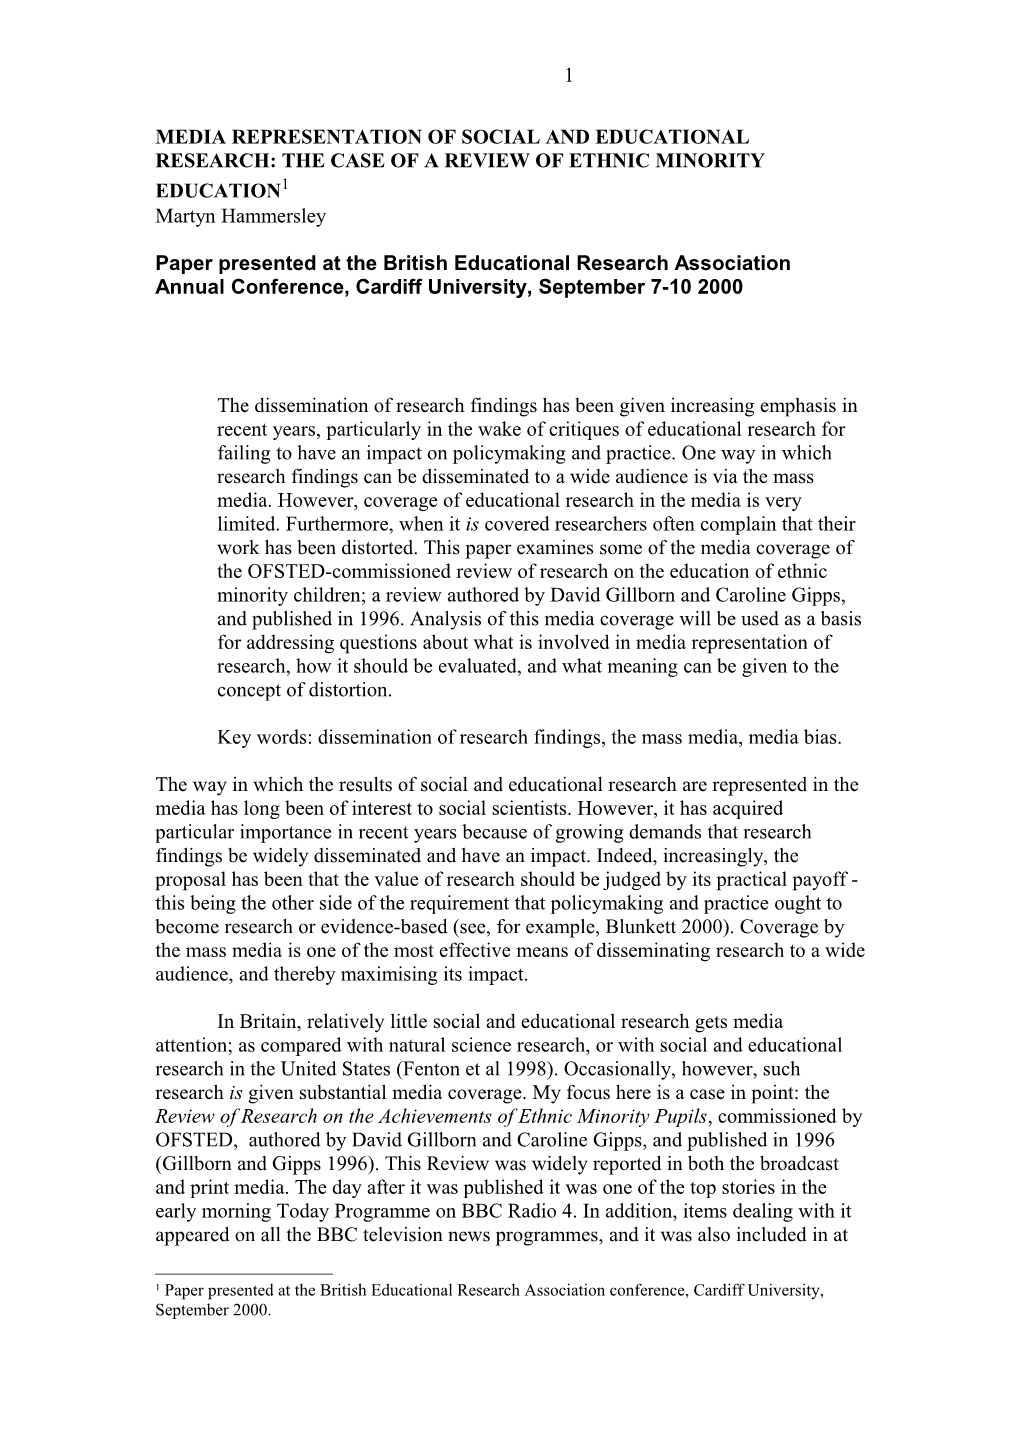 Media Representation of Social and Educational Research: the Case of a Review of Ethnic